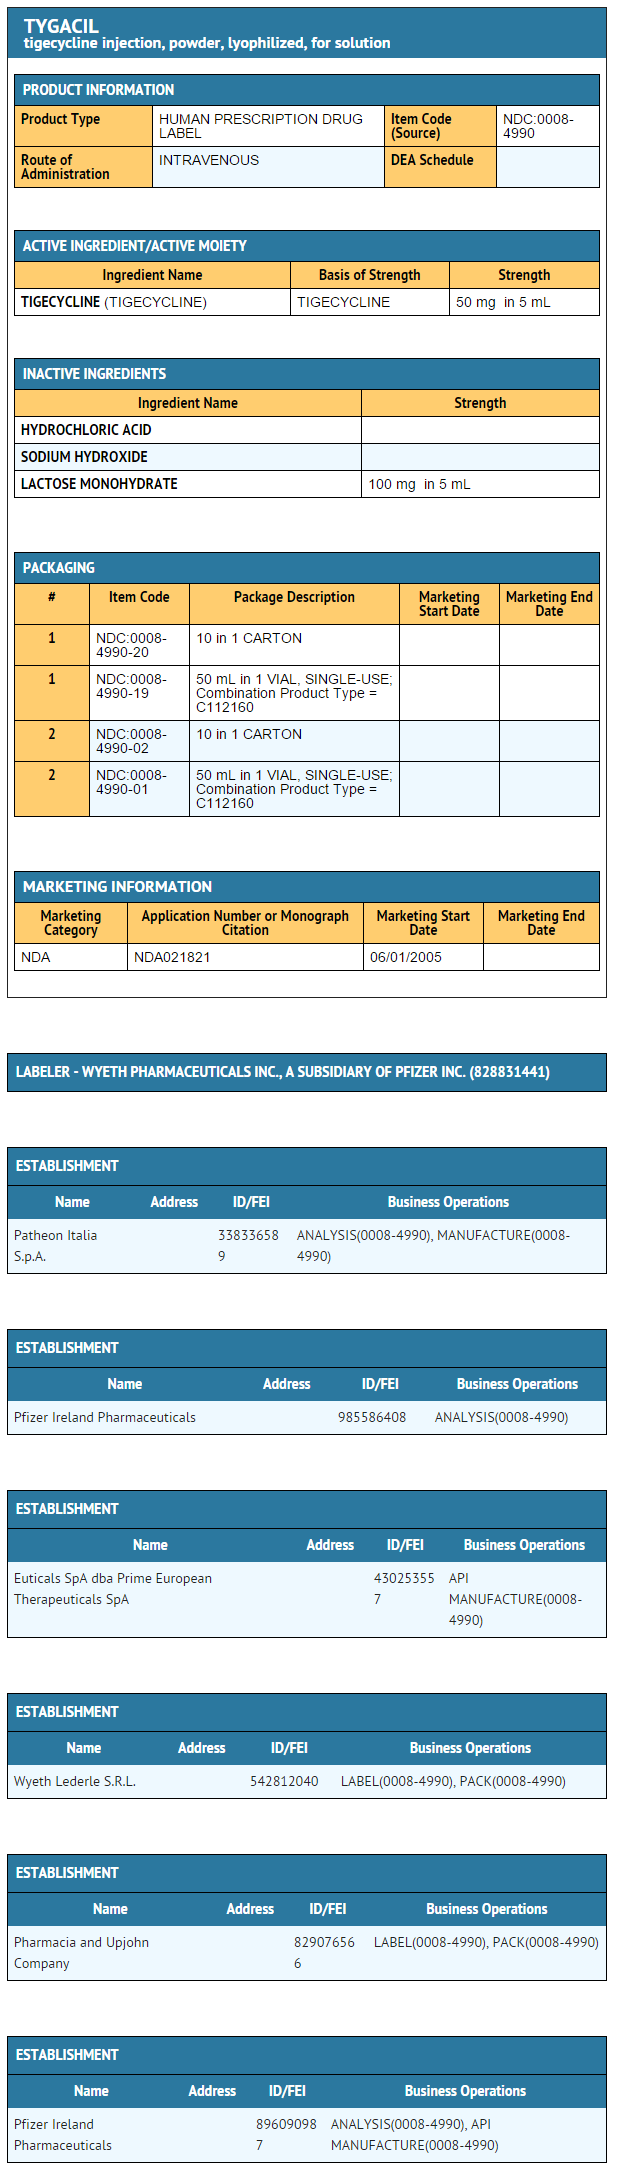 File:Tigecycline FDA package label.png